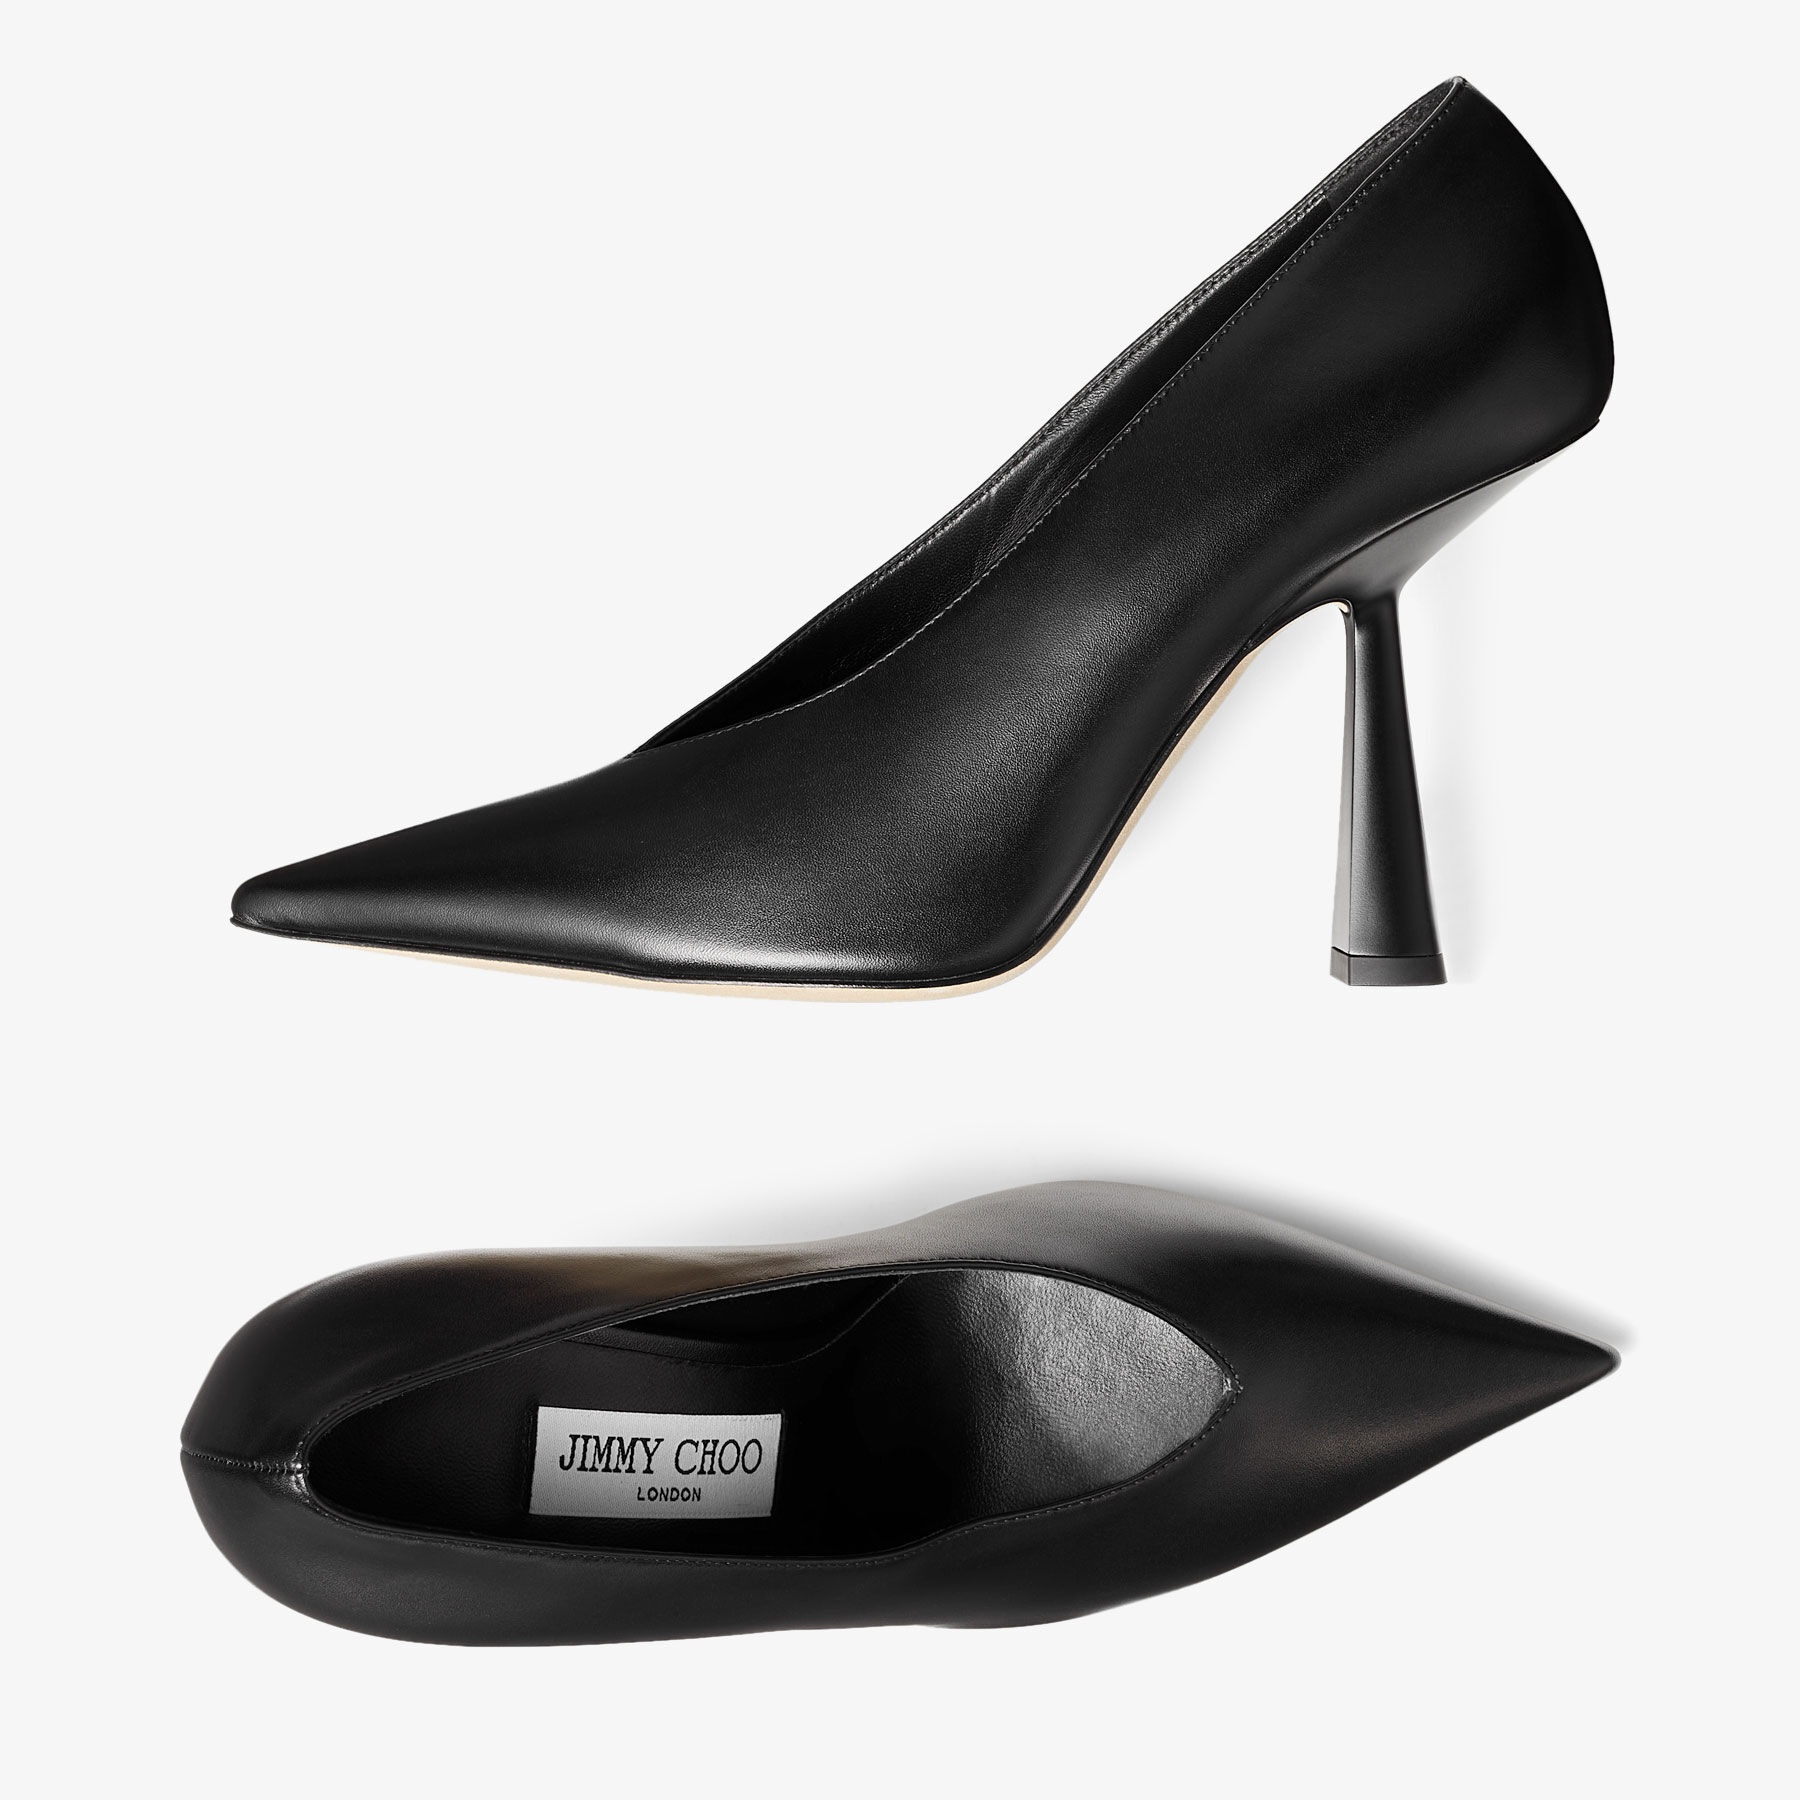 Maryanne 100
Black Calf Leather Pointed-Toe Pumps - 4